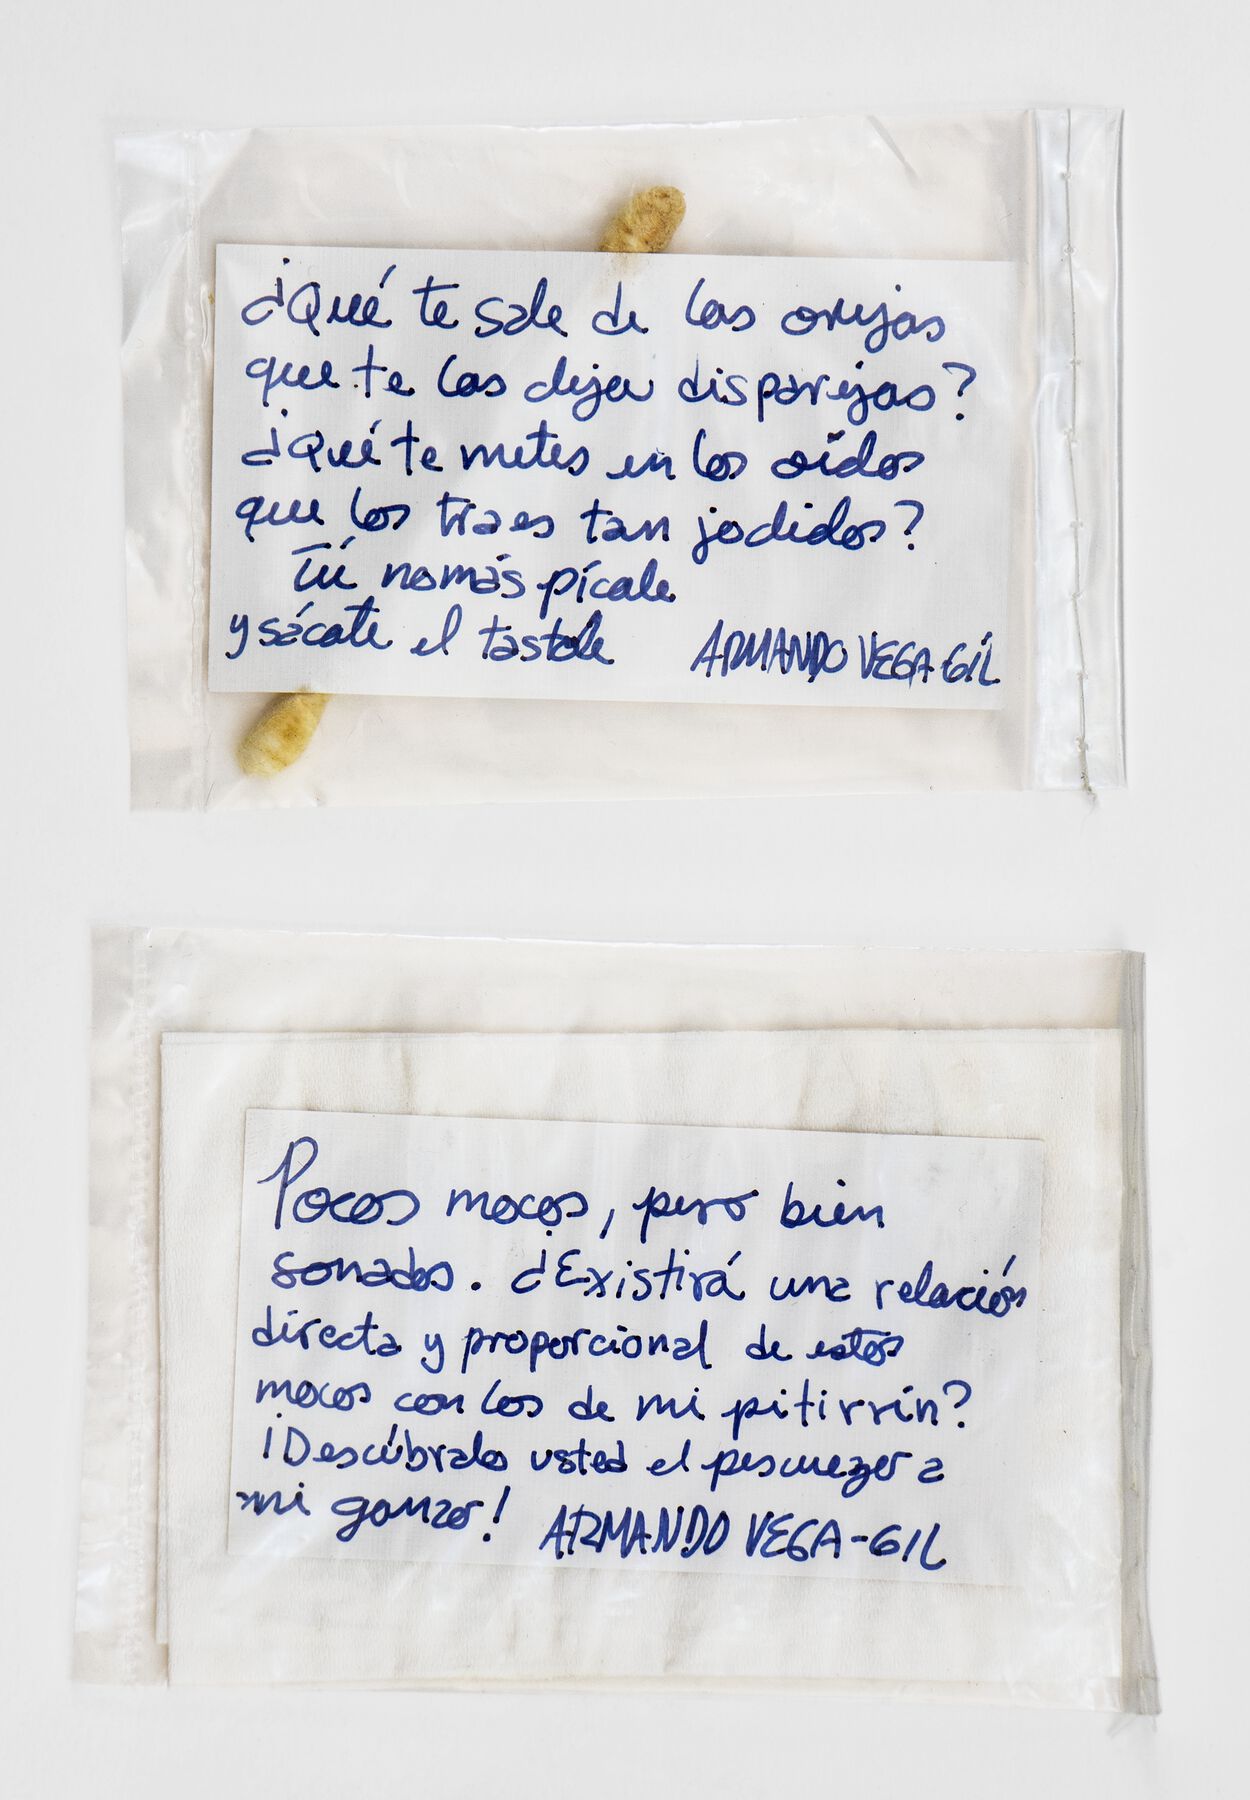 Two plastic packets organized from top to bottom with white notes that are written in Spanish with blue ink, the top card containing a dirty ear swab behind the card